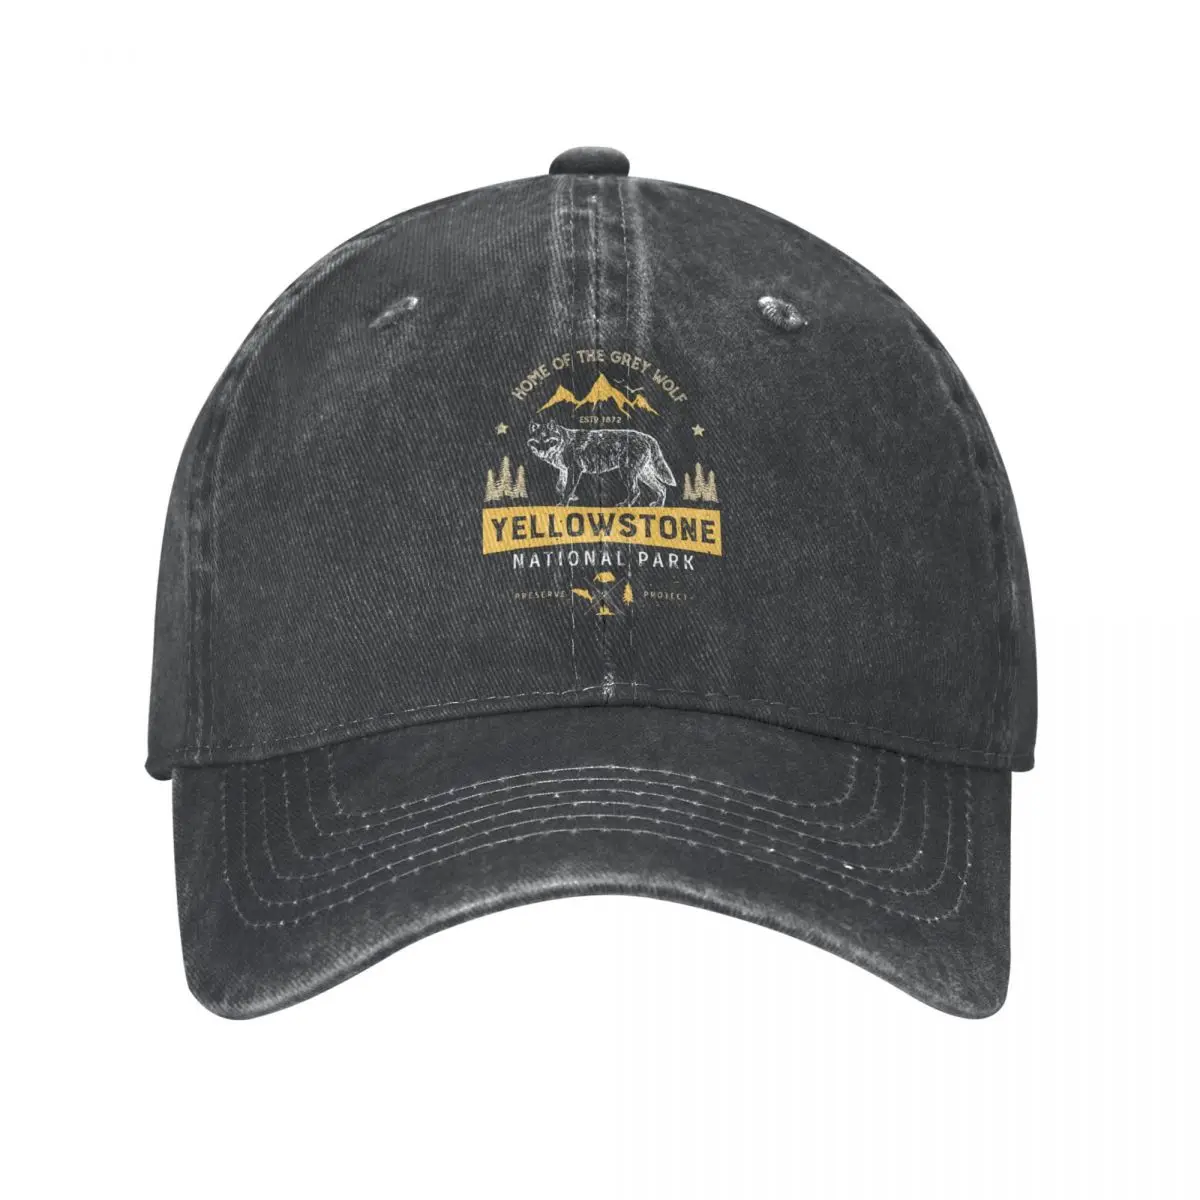 

Yellowstone National Park Grey Wolf Vintage Gifts Washed Cotton Baseball Cap Sun Hats Cap Hats Spring Autumn Classic Casquette